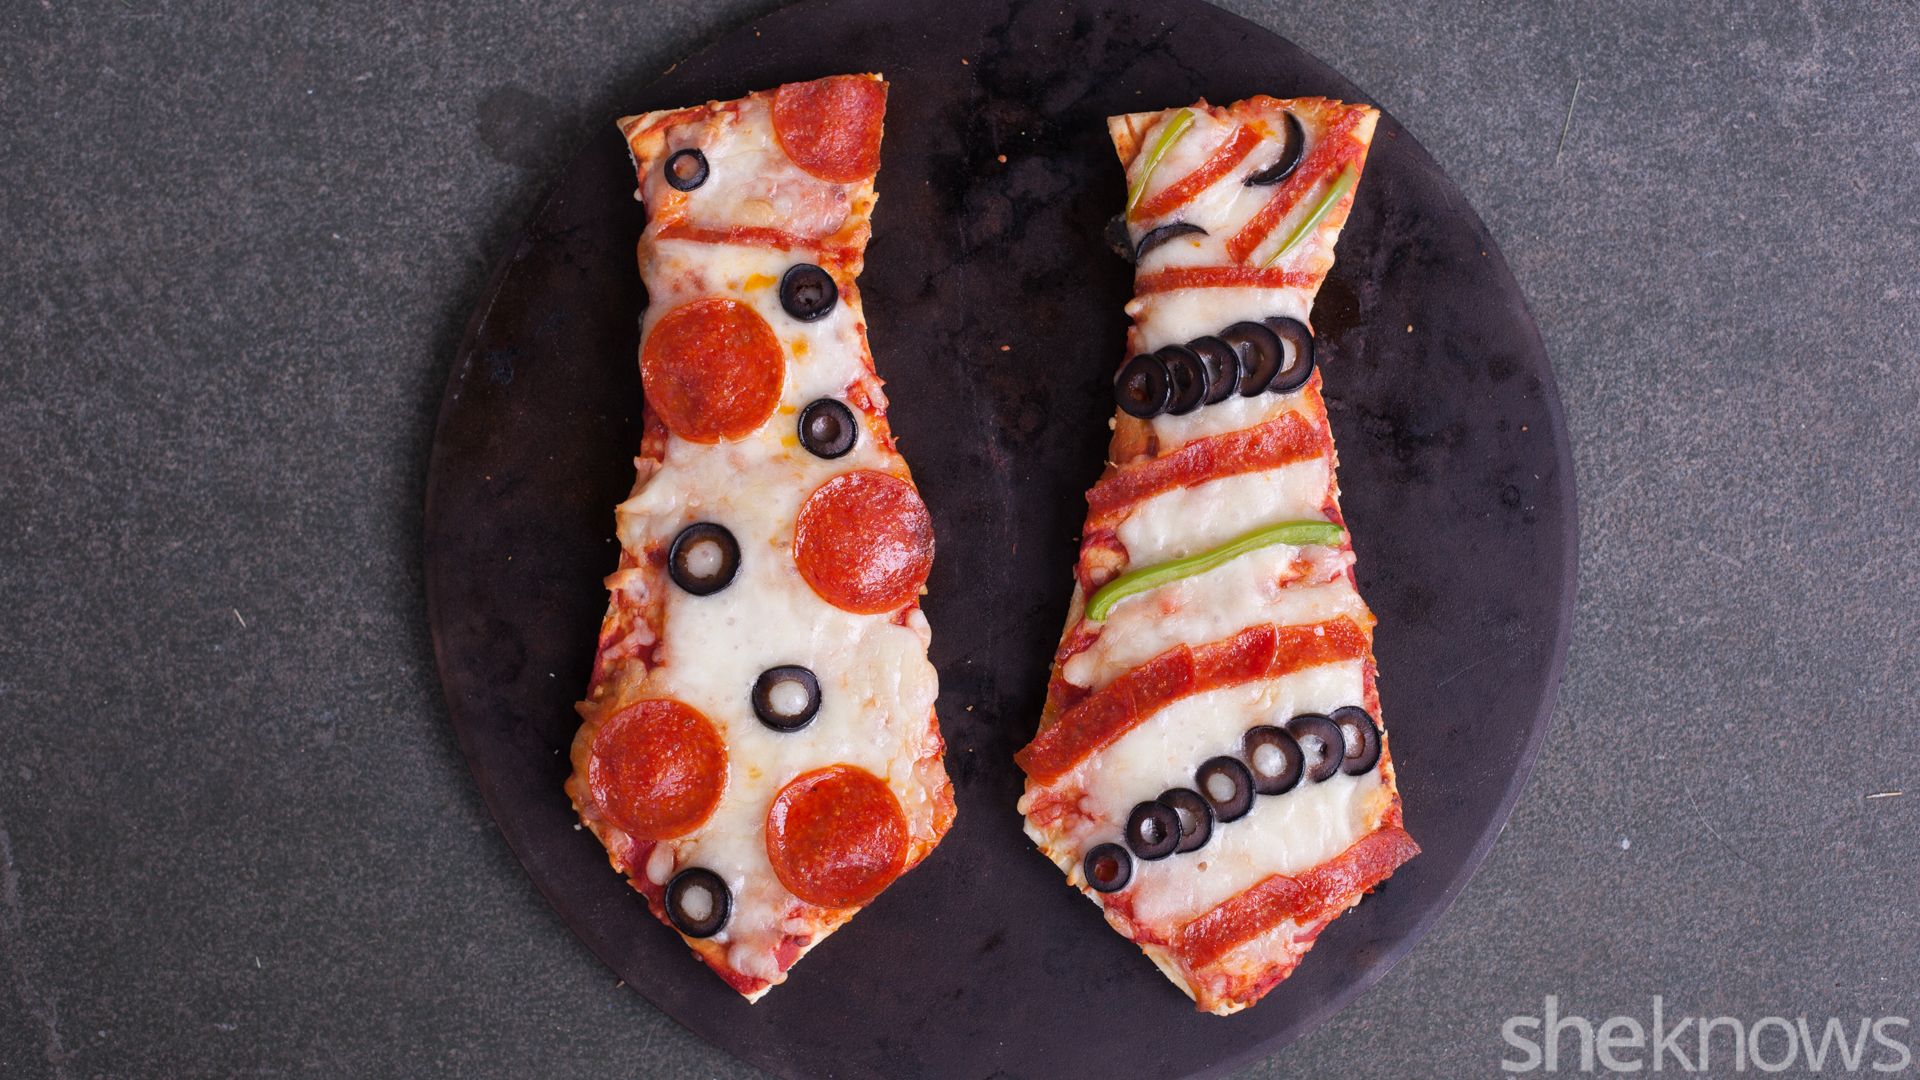 Father's Day food gifts that the kids can help make: Tie-shaped pizzas for Father's Day at SheKnows